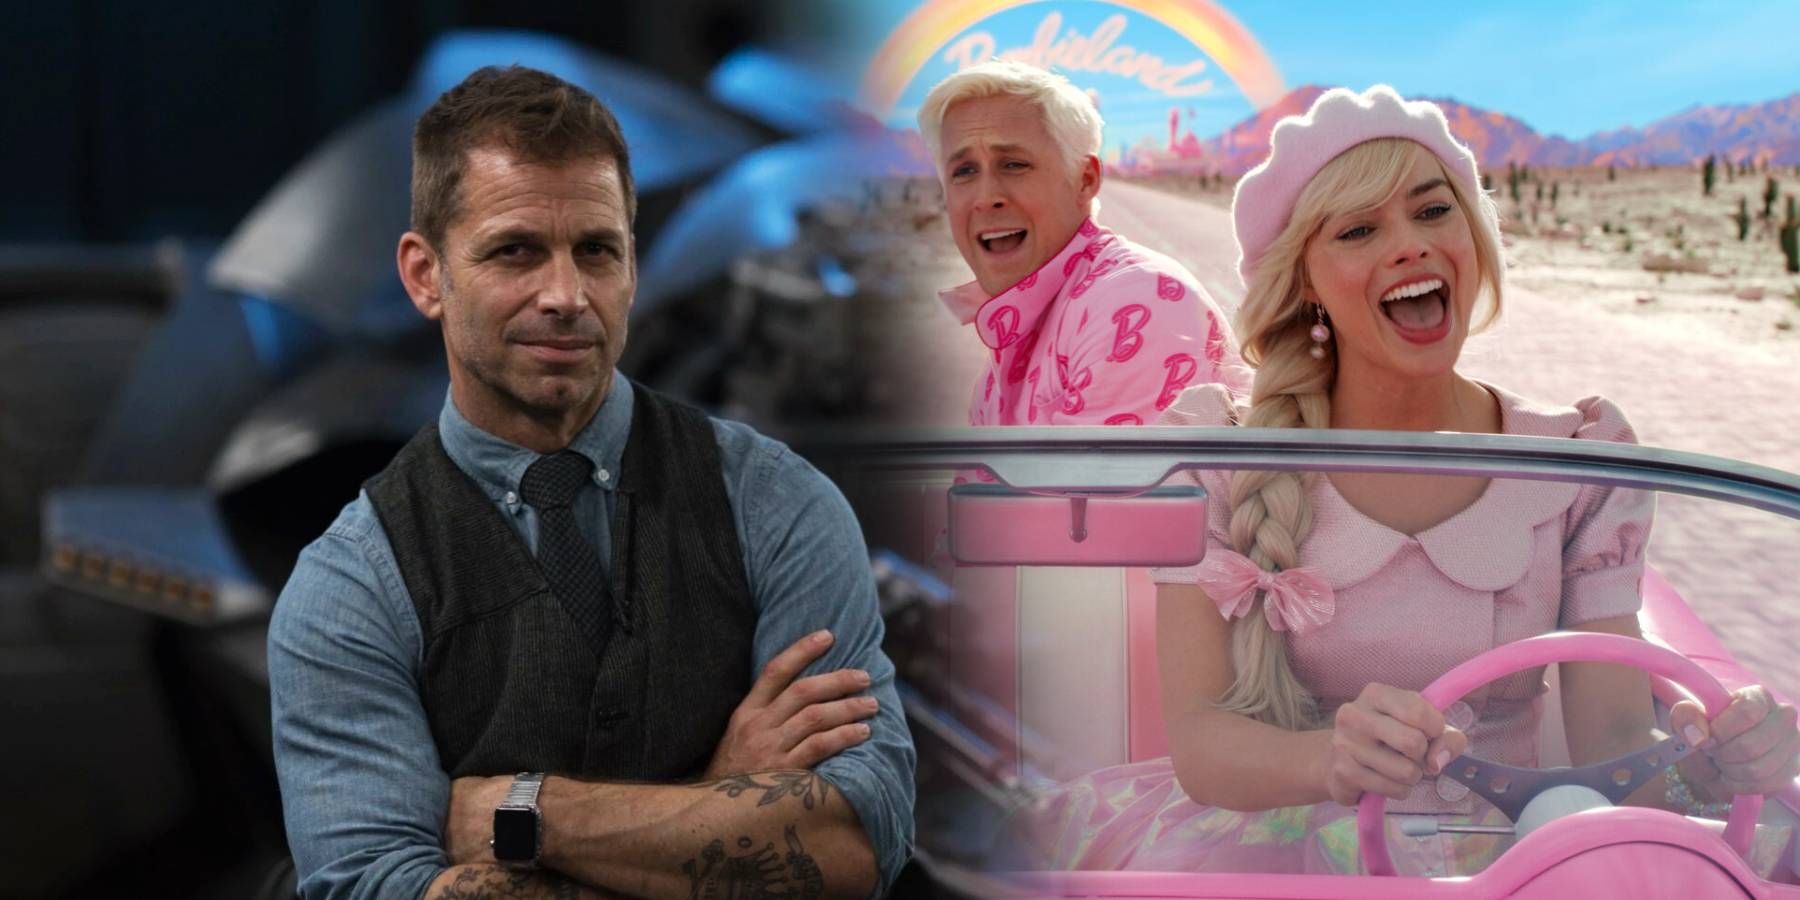 Zack Snyder split image with Margot Robbie and Ryan Gosling as Barbie and Ken from the movie Barbie